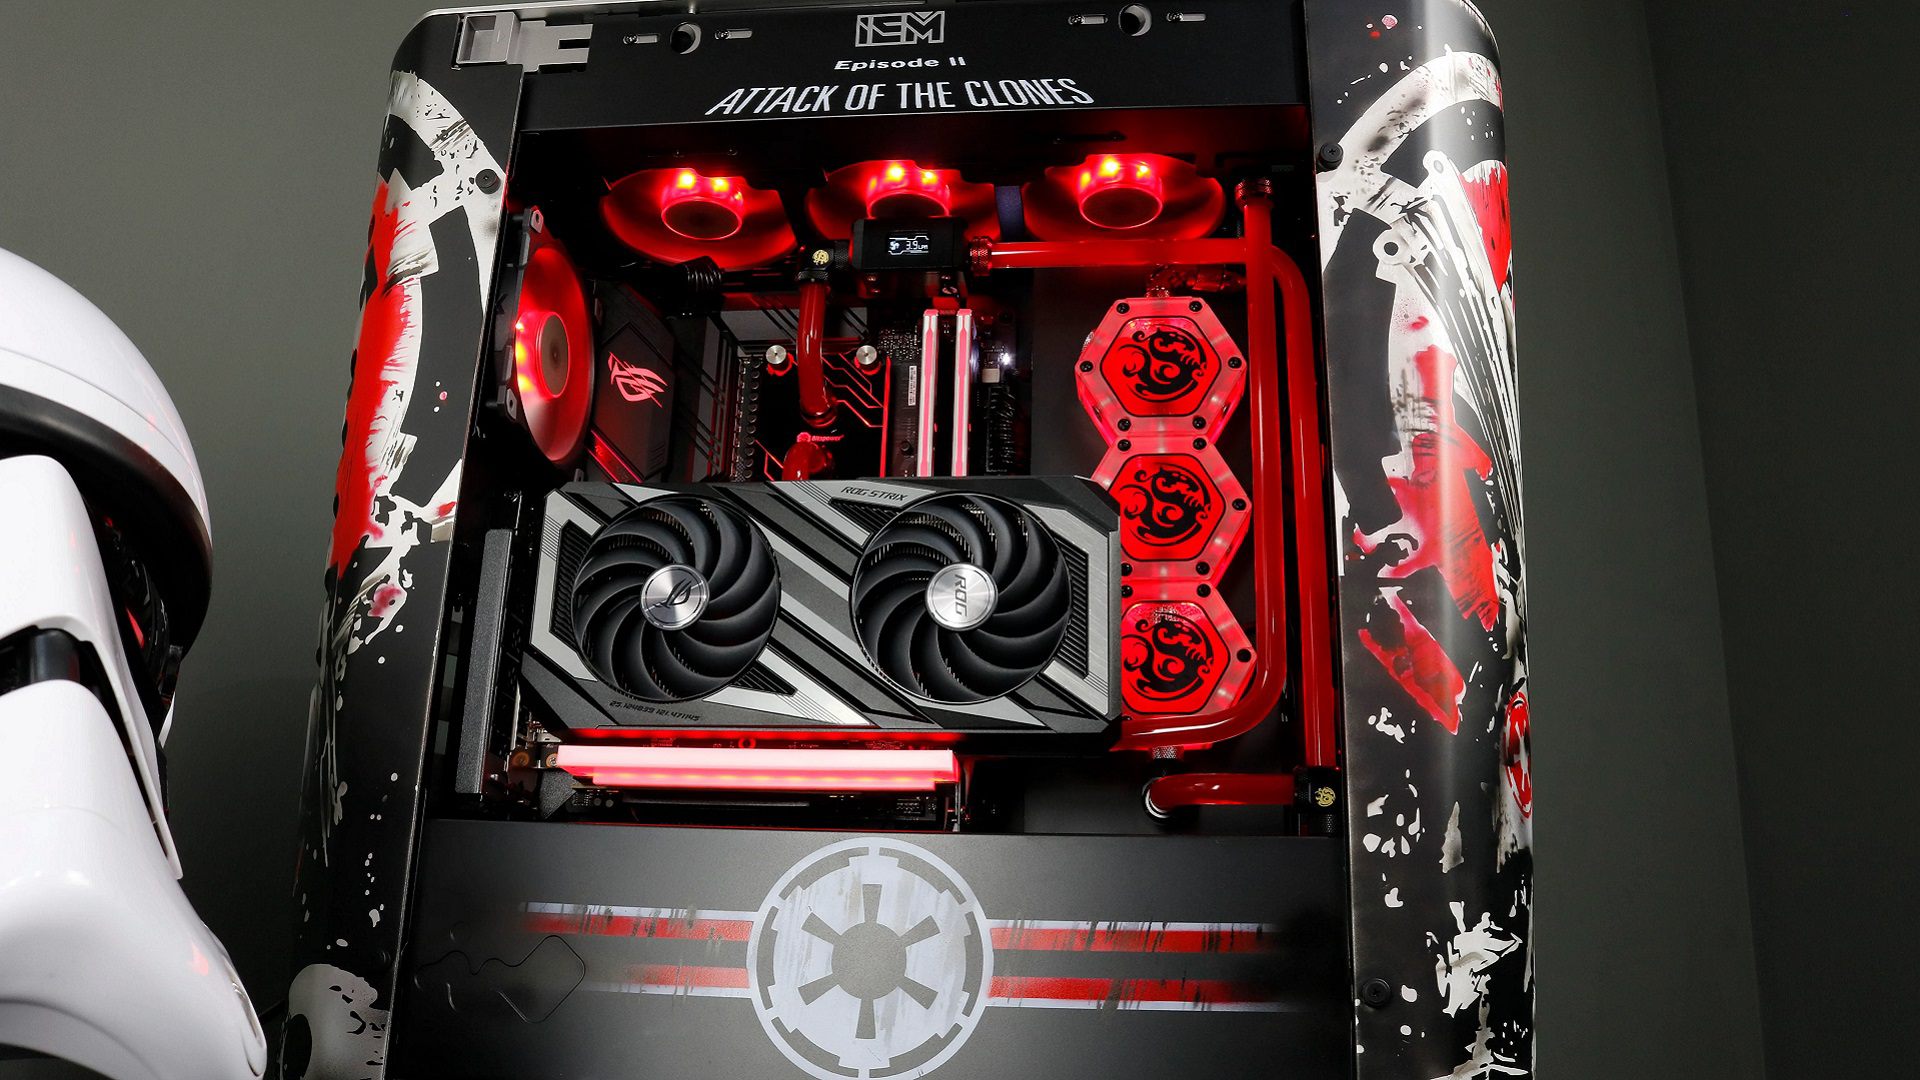 Custom Star Wars gaming PC with red parts, vertical AMD graphics card and "Attack of the Clones" written on top